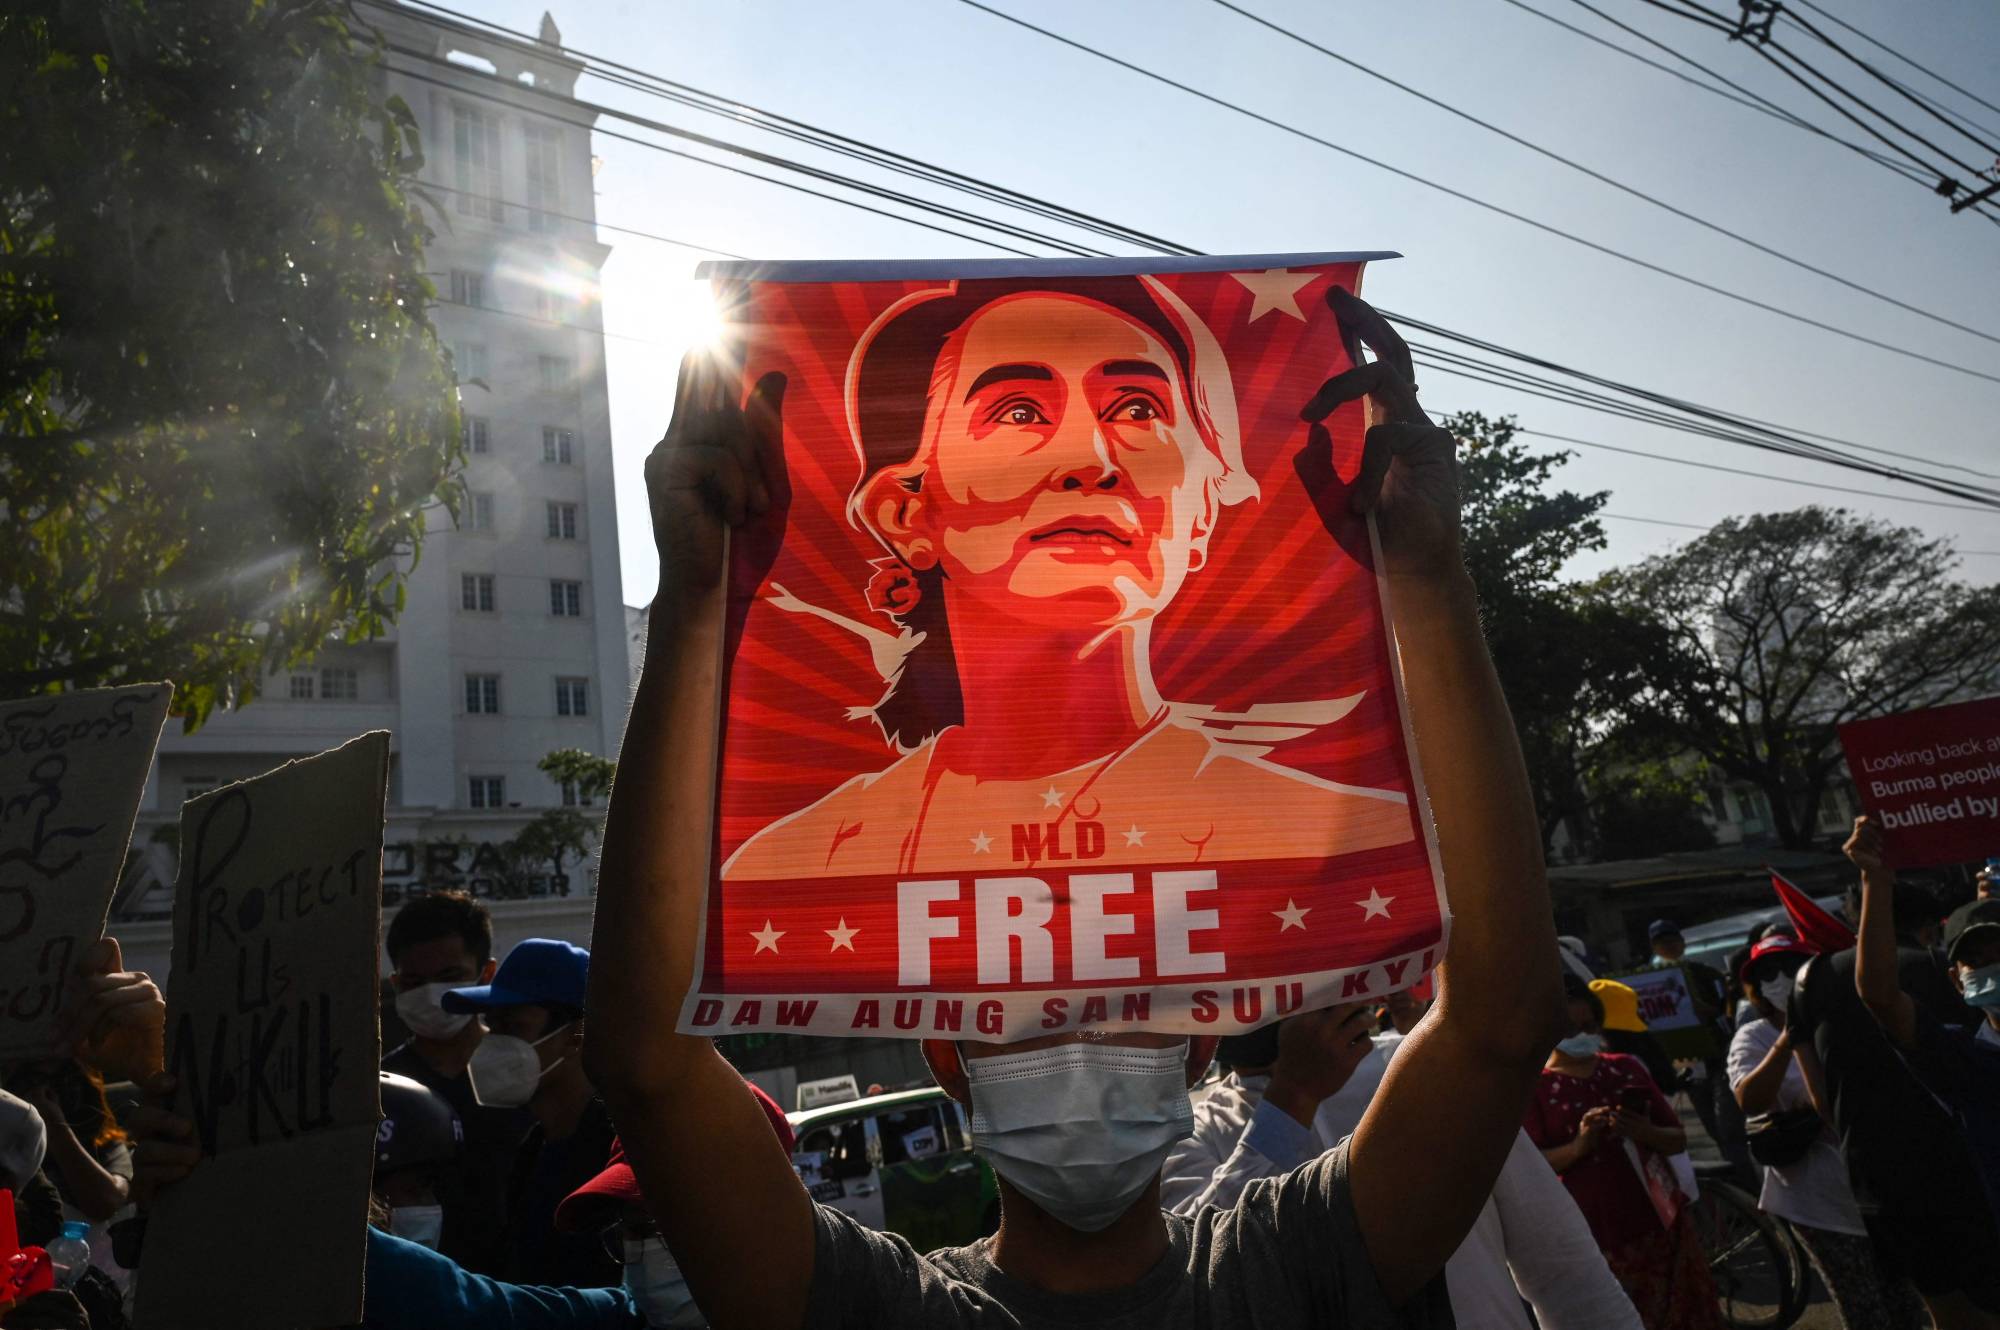 A protester holds up a poster featuring Aung San Suu Kyi during a demonstration against Myanmar's military coup, in Yangon in February 2021.  | AFP-JIJI